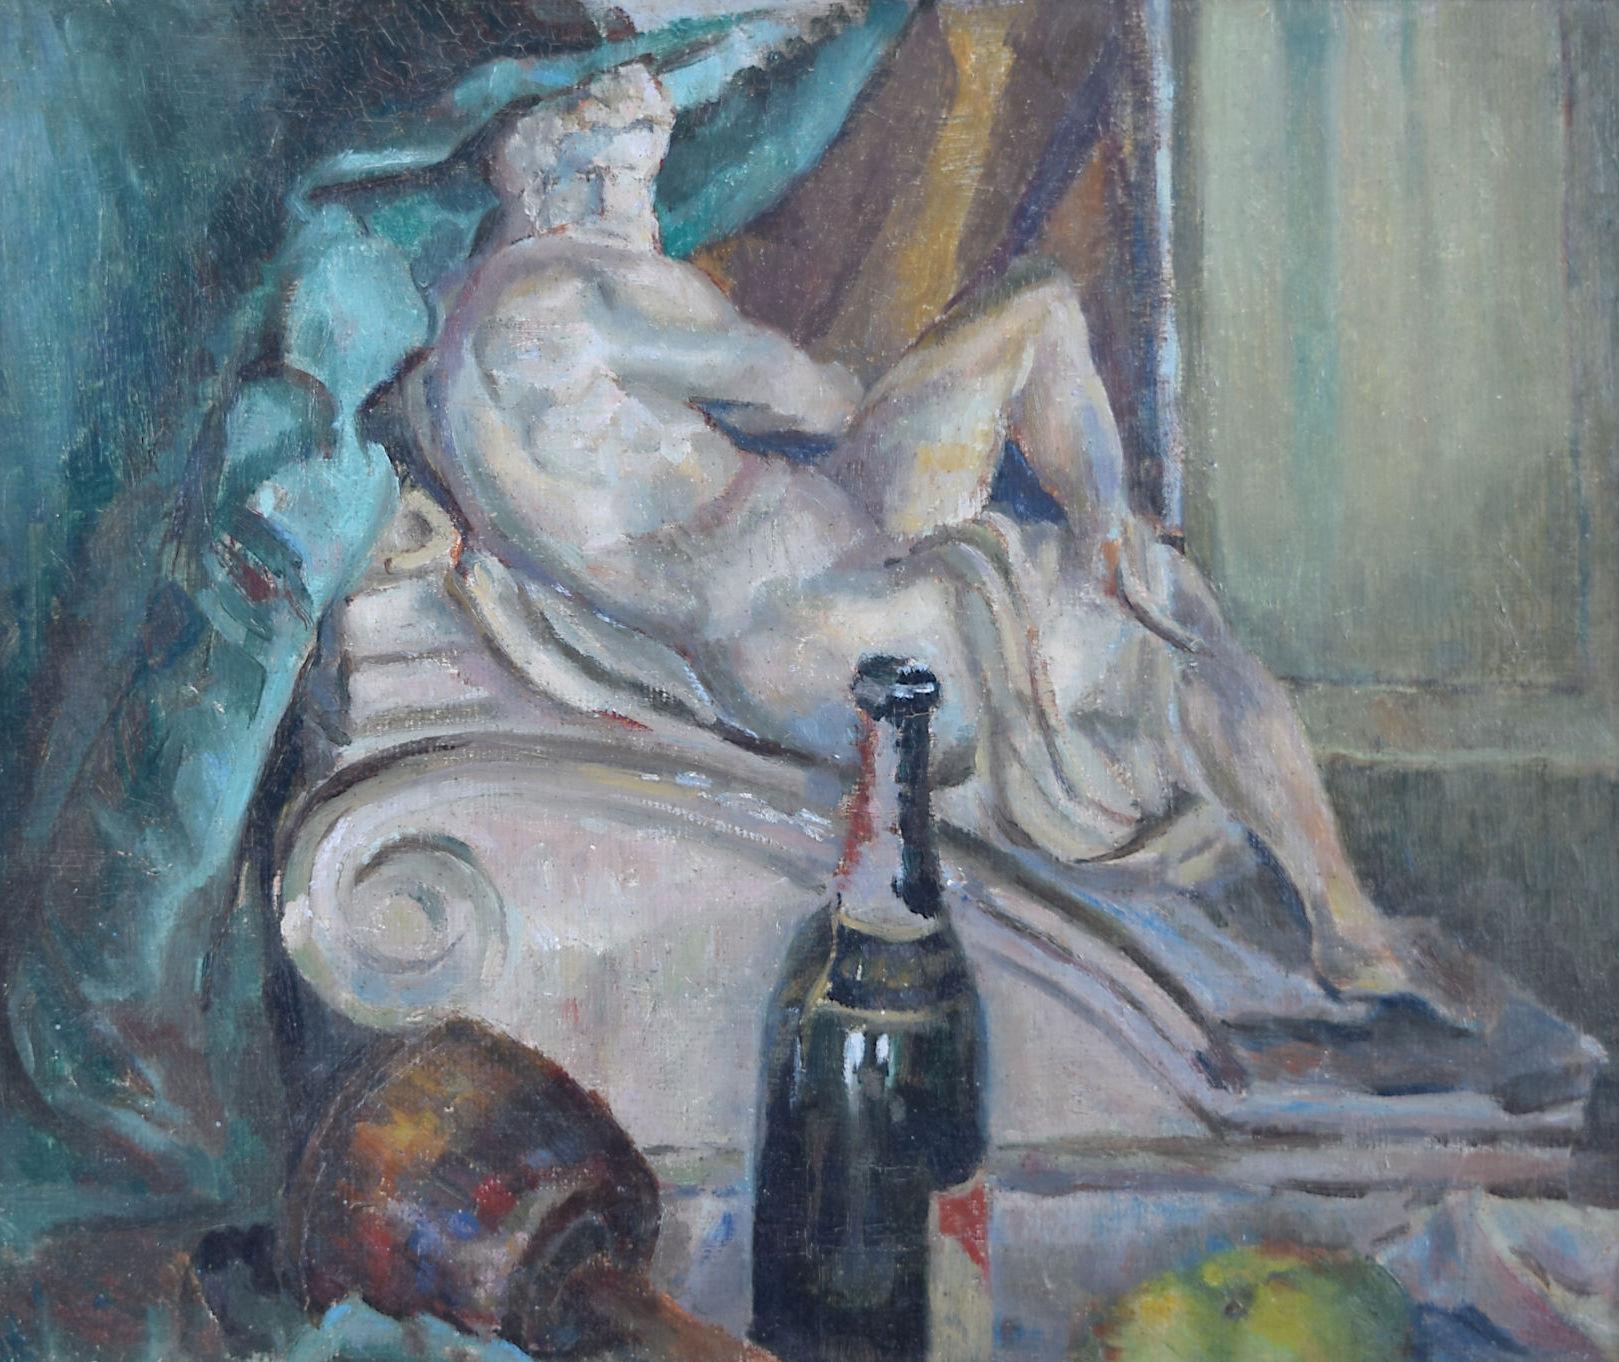 Sir Terry Frost Abstract Painting - Terry Frost 'Bottle and Statue' oil painting abstract still life interior